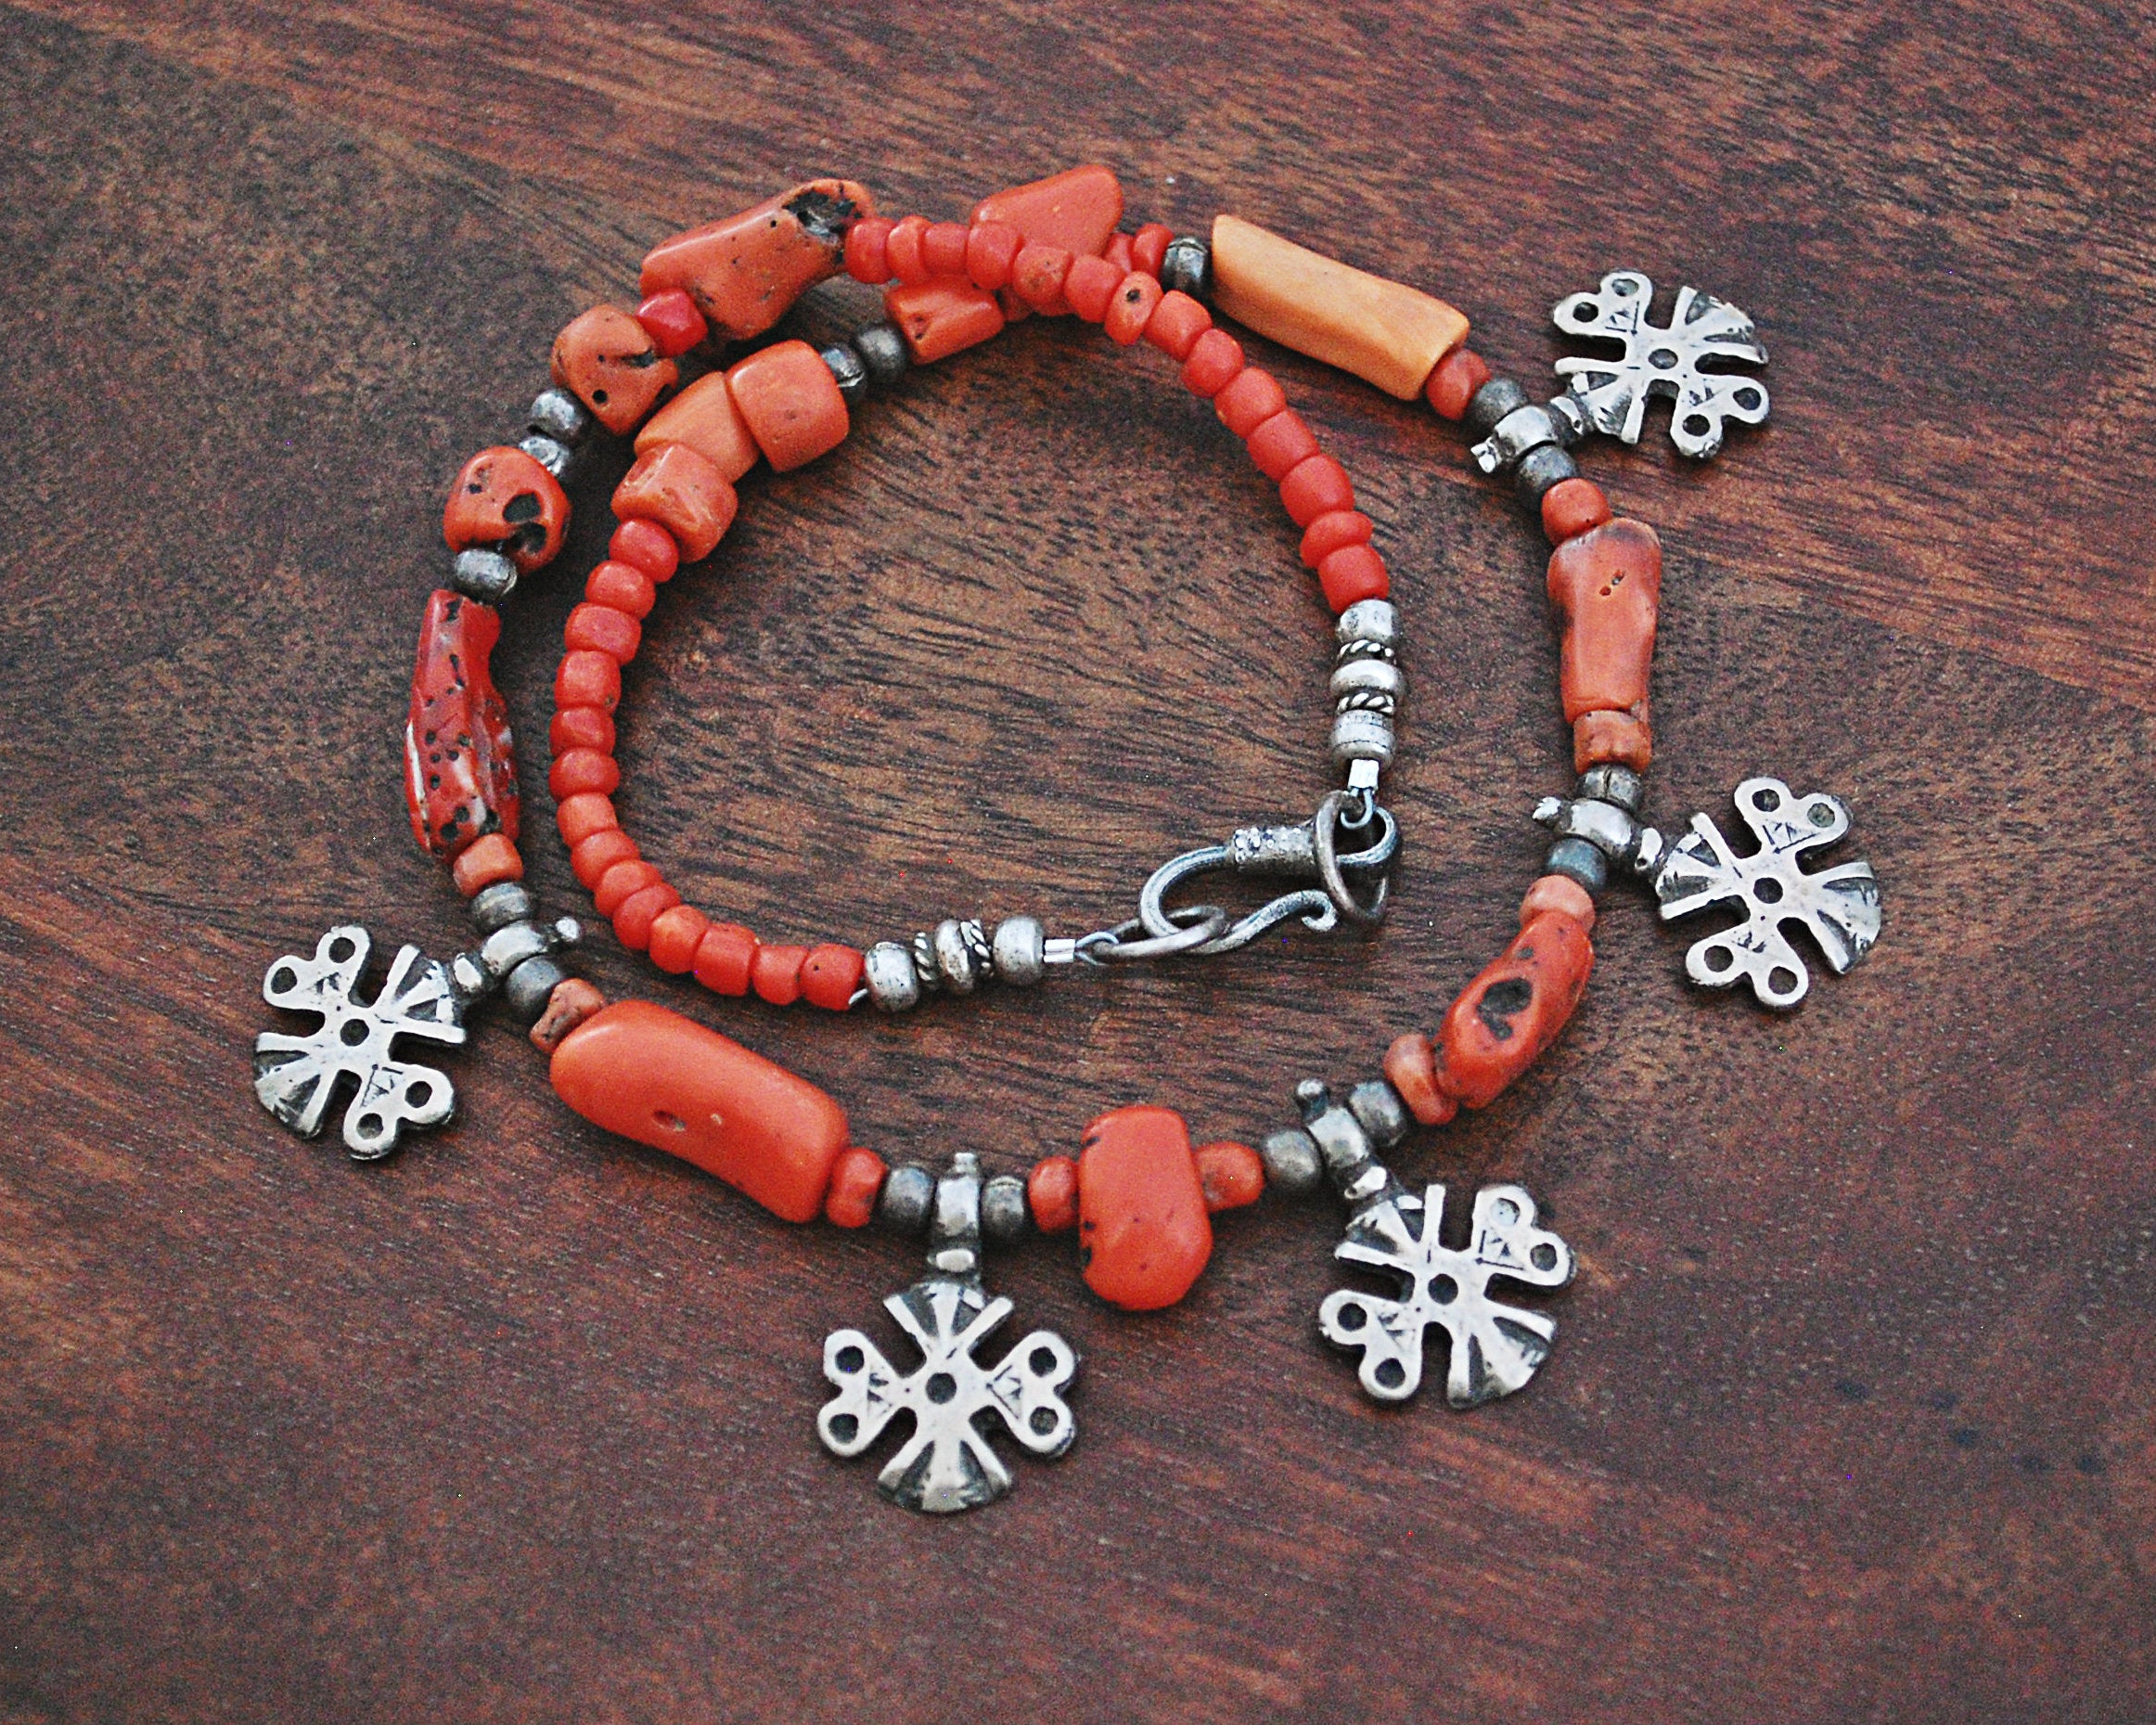 Berber Charms Coral Necklace with Silver Beads